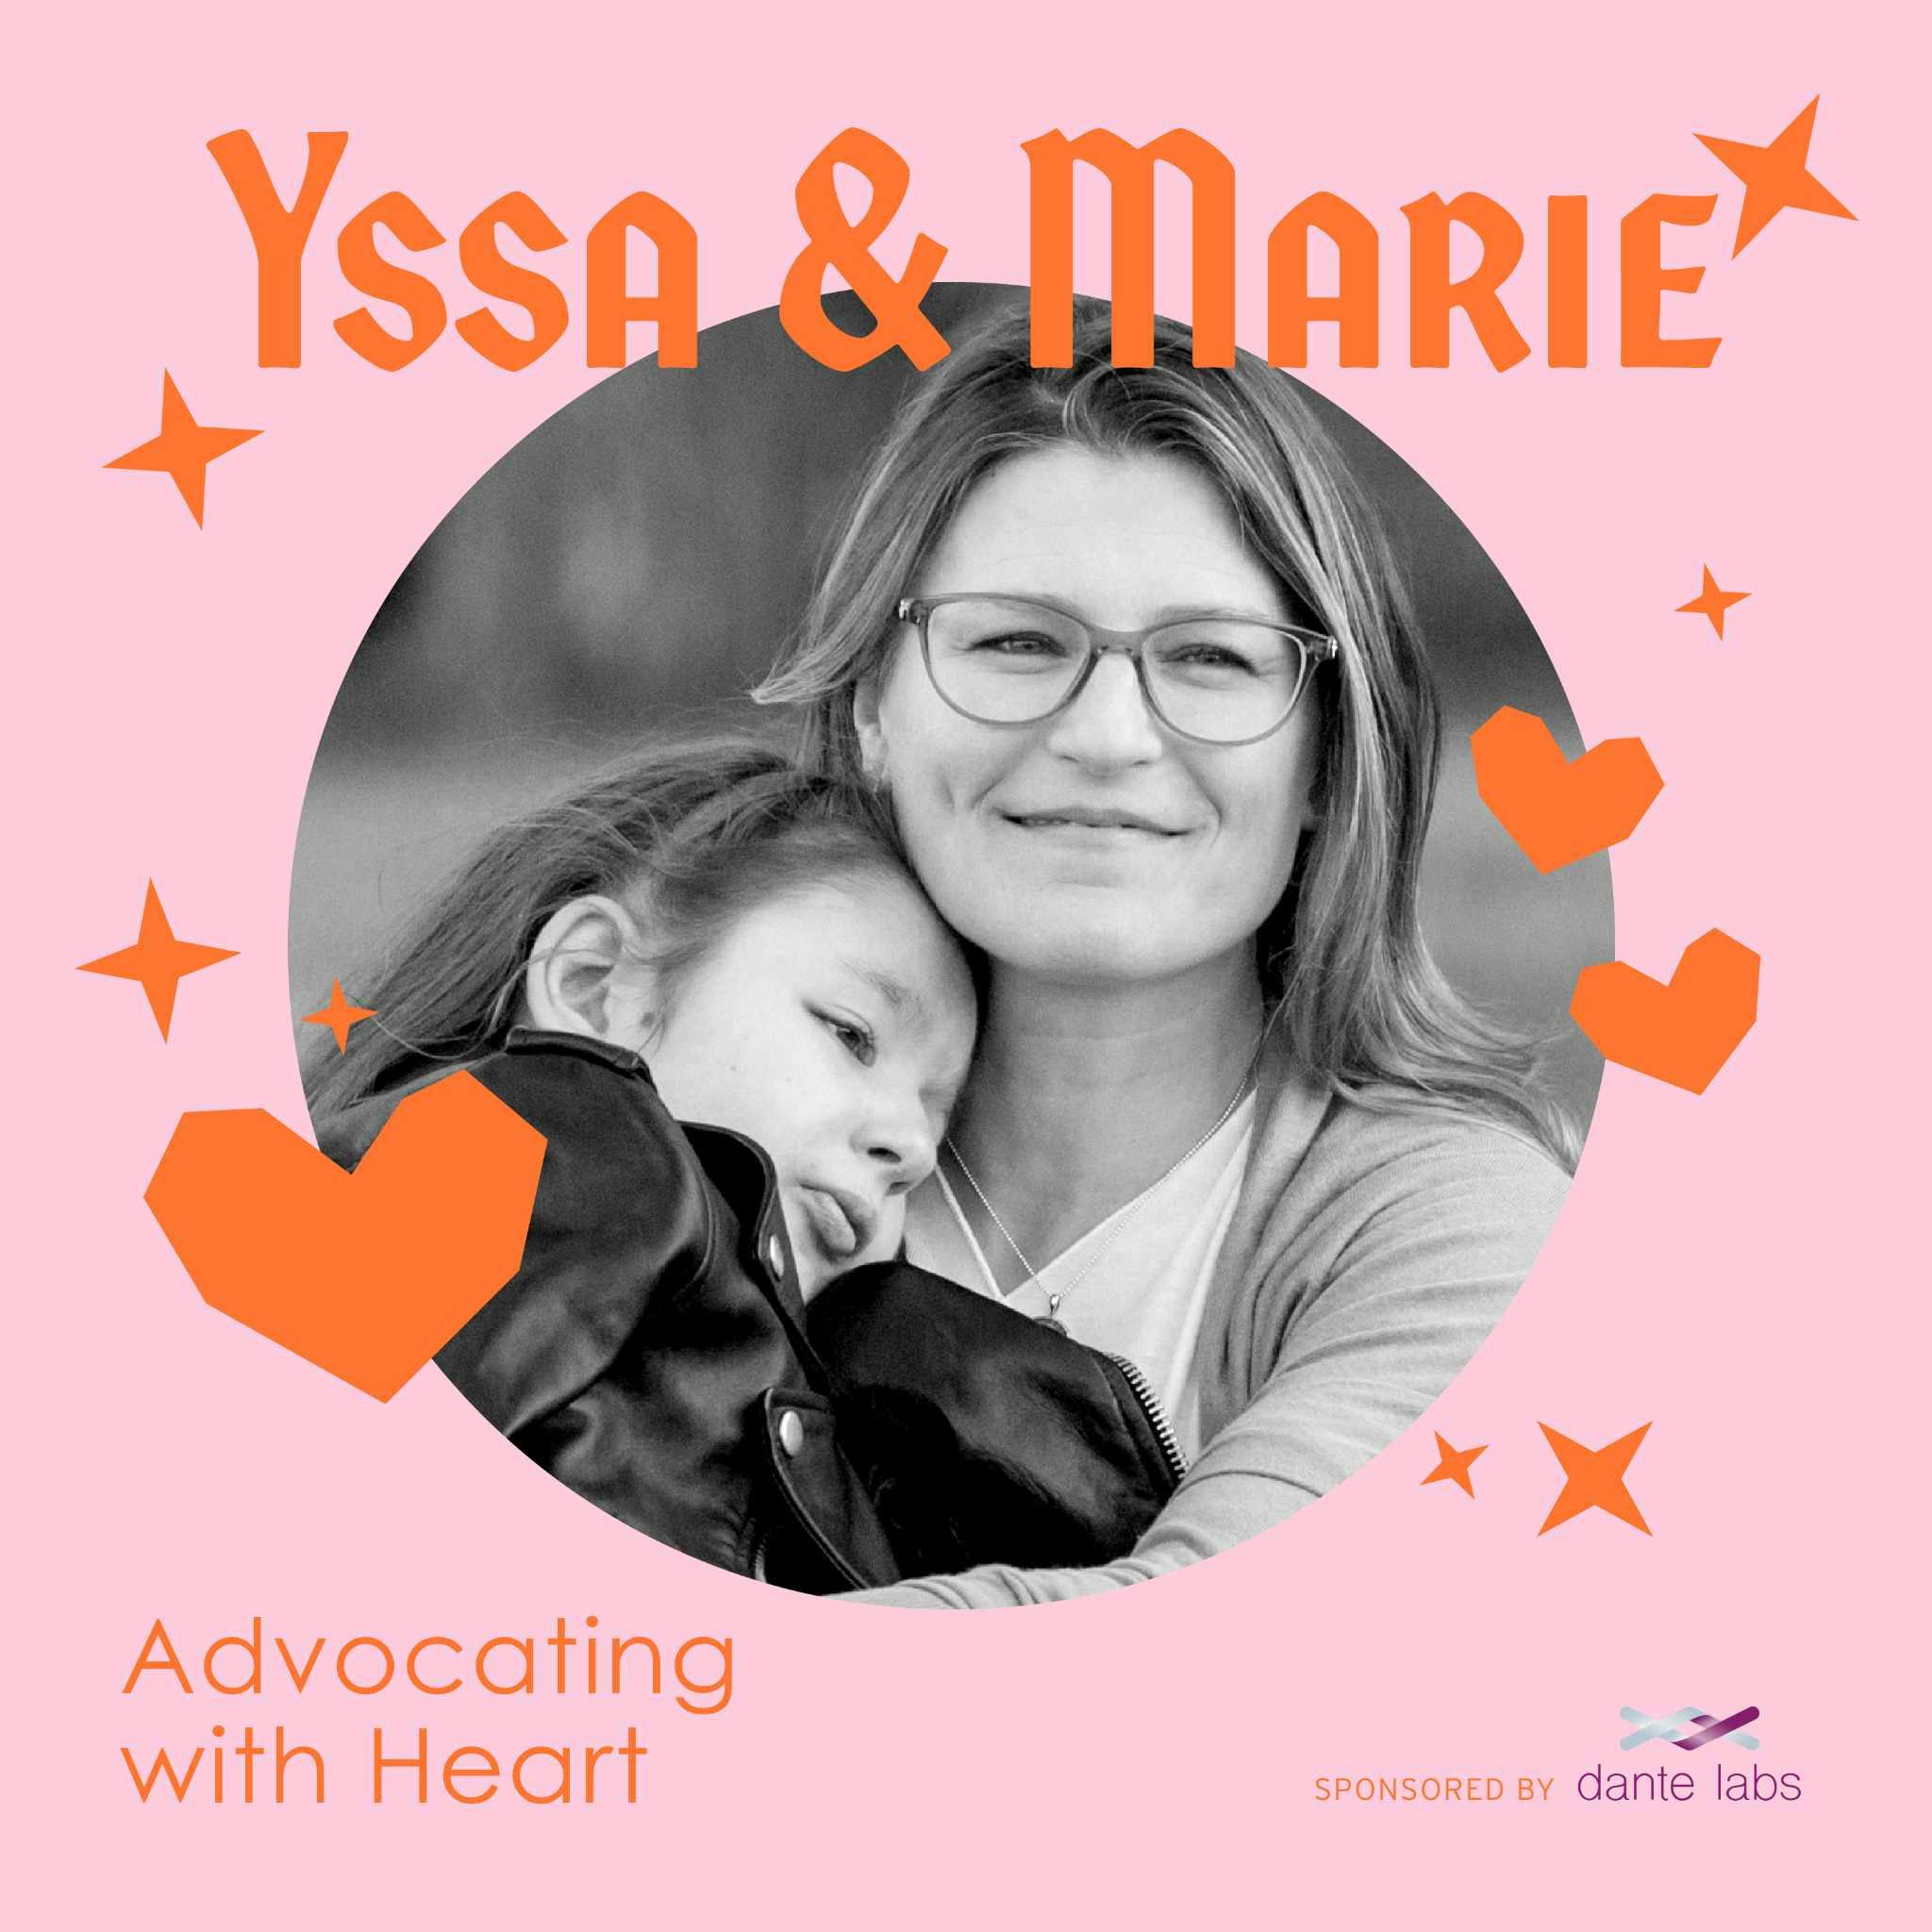 Advocating with Heart - Striking the Balance Between Medical Insights and Personal Narratives - A Tribute to Valerie Marie with RING14 Co-Founder Yssa Dean DeWoody